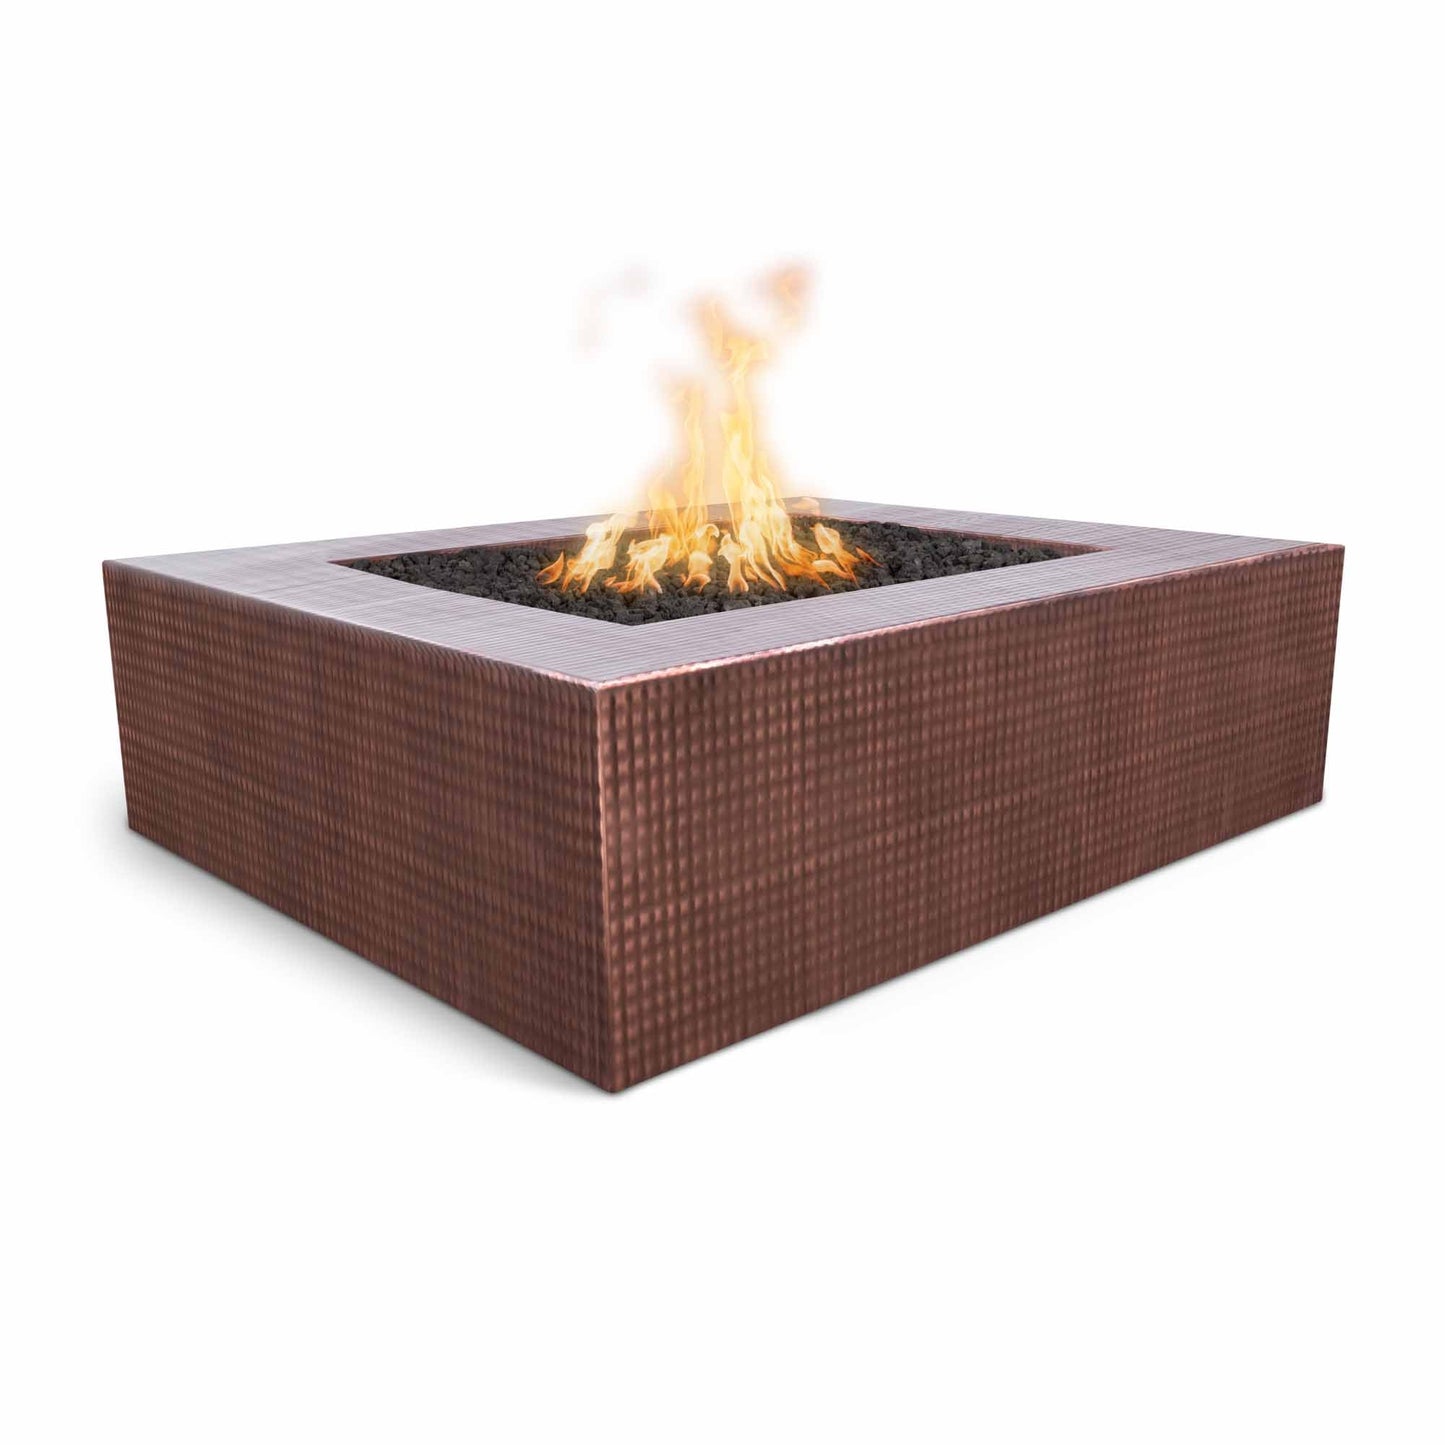 The Outdoor Plus Square Quad 36" Hammered Copper Natural Gas Fire Pit with Match Lit Ignition